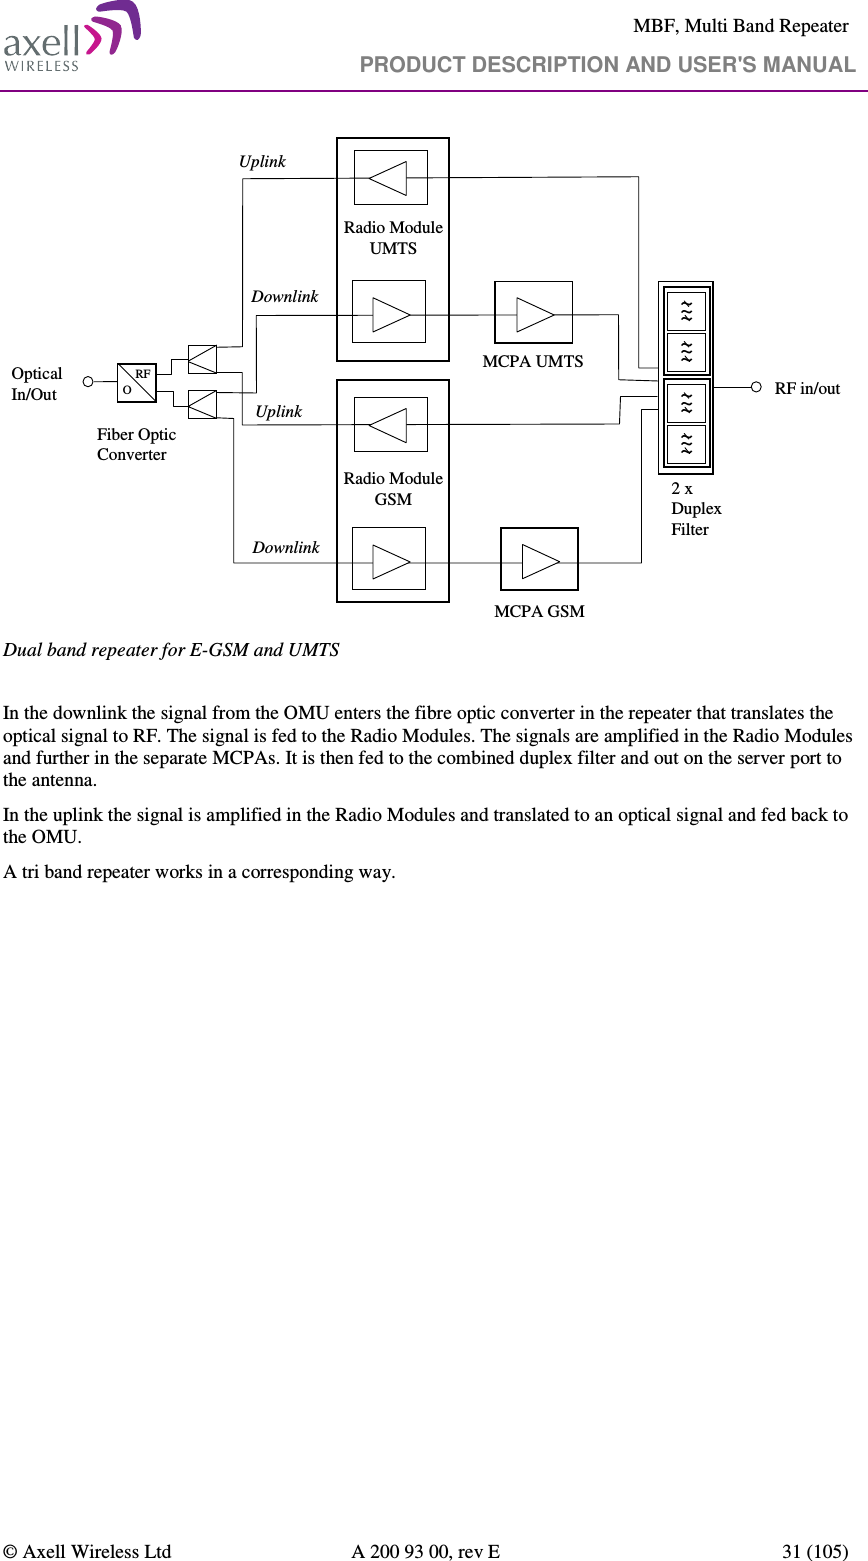     MBF, Multi Band Repeater                                     PRODUCT DESCRIPTION AND USER&apos;S MANUAL   © Axell Wireless Ltd  A 200 93 00, rev E  31 (105)  MCPA UMTS2 x Duplex FilterRFOOpticalIn/OutDownlinkUplinkRF in/outFiber OpticConverterRadio Module UMTSRadio Module GSMMCPA GSMDownlinkUplink~~~~~~~~~~~~~~~~~~~~~~~~ Dual band repeater for E-GSM and UMTS  In the downlink the signal from the OMU enters the fibre optic converter in the repeater that translates the optical signal to RF. The signal is fed to the Radio Modules. The signals are amplified in the Radio Modules and further in the separate MCPAs. It is then fed to the combined duplex filter and out on the server port to the antenna. In the uplink the signal is amplified in the Radio Modules and translated to an optical signal and fed back to the OMU.  A tri band repeater works in a corresponding way. 